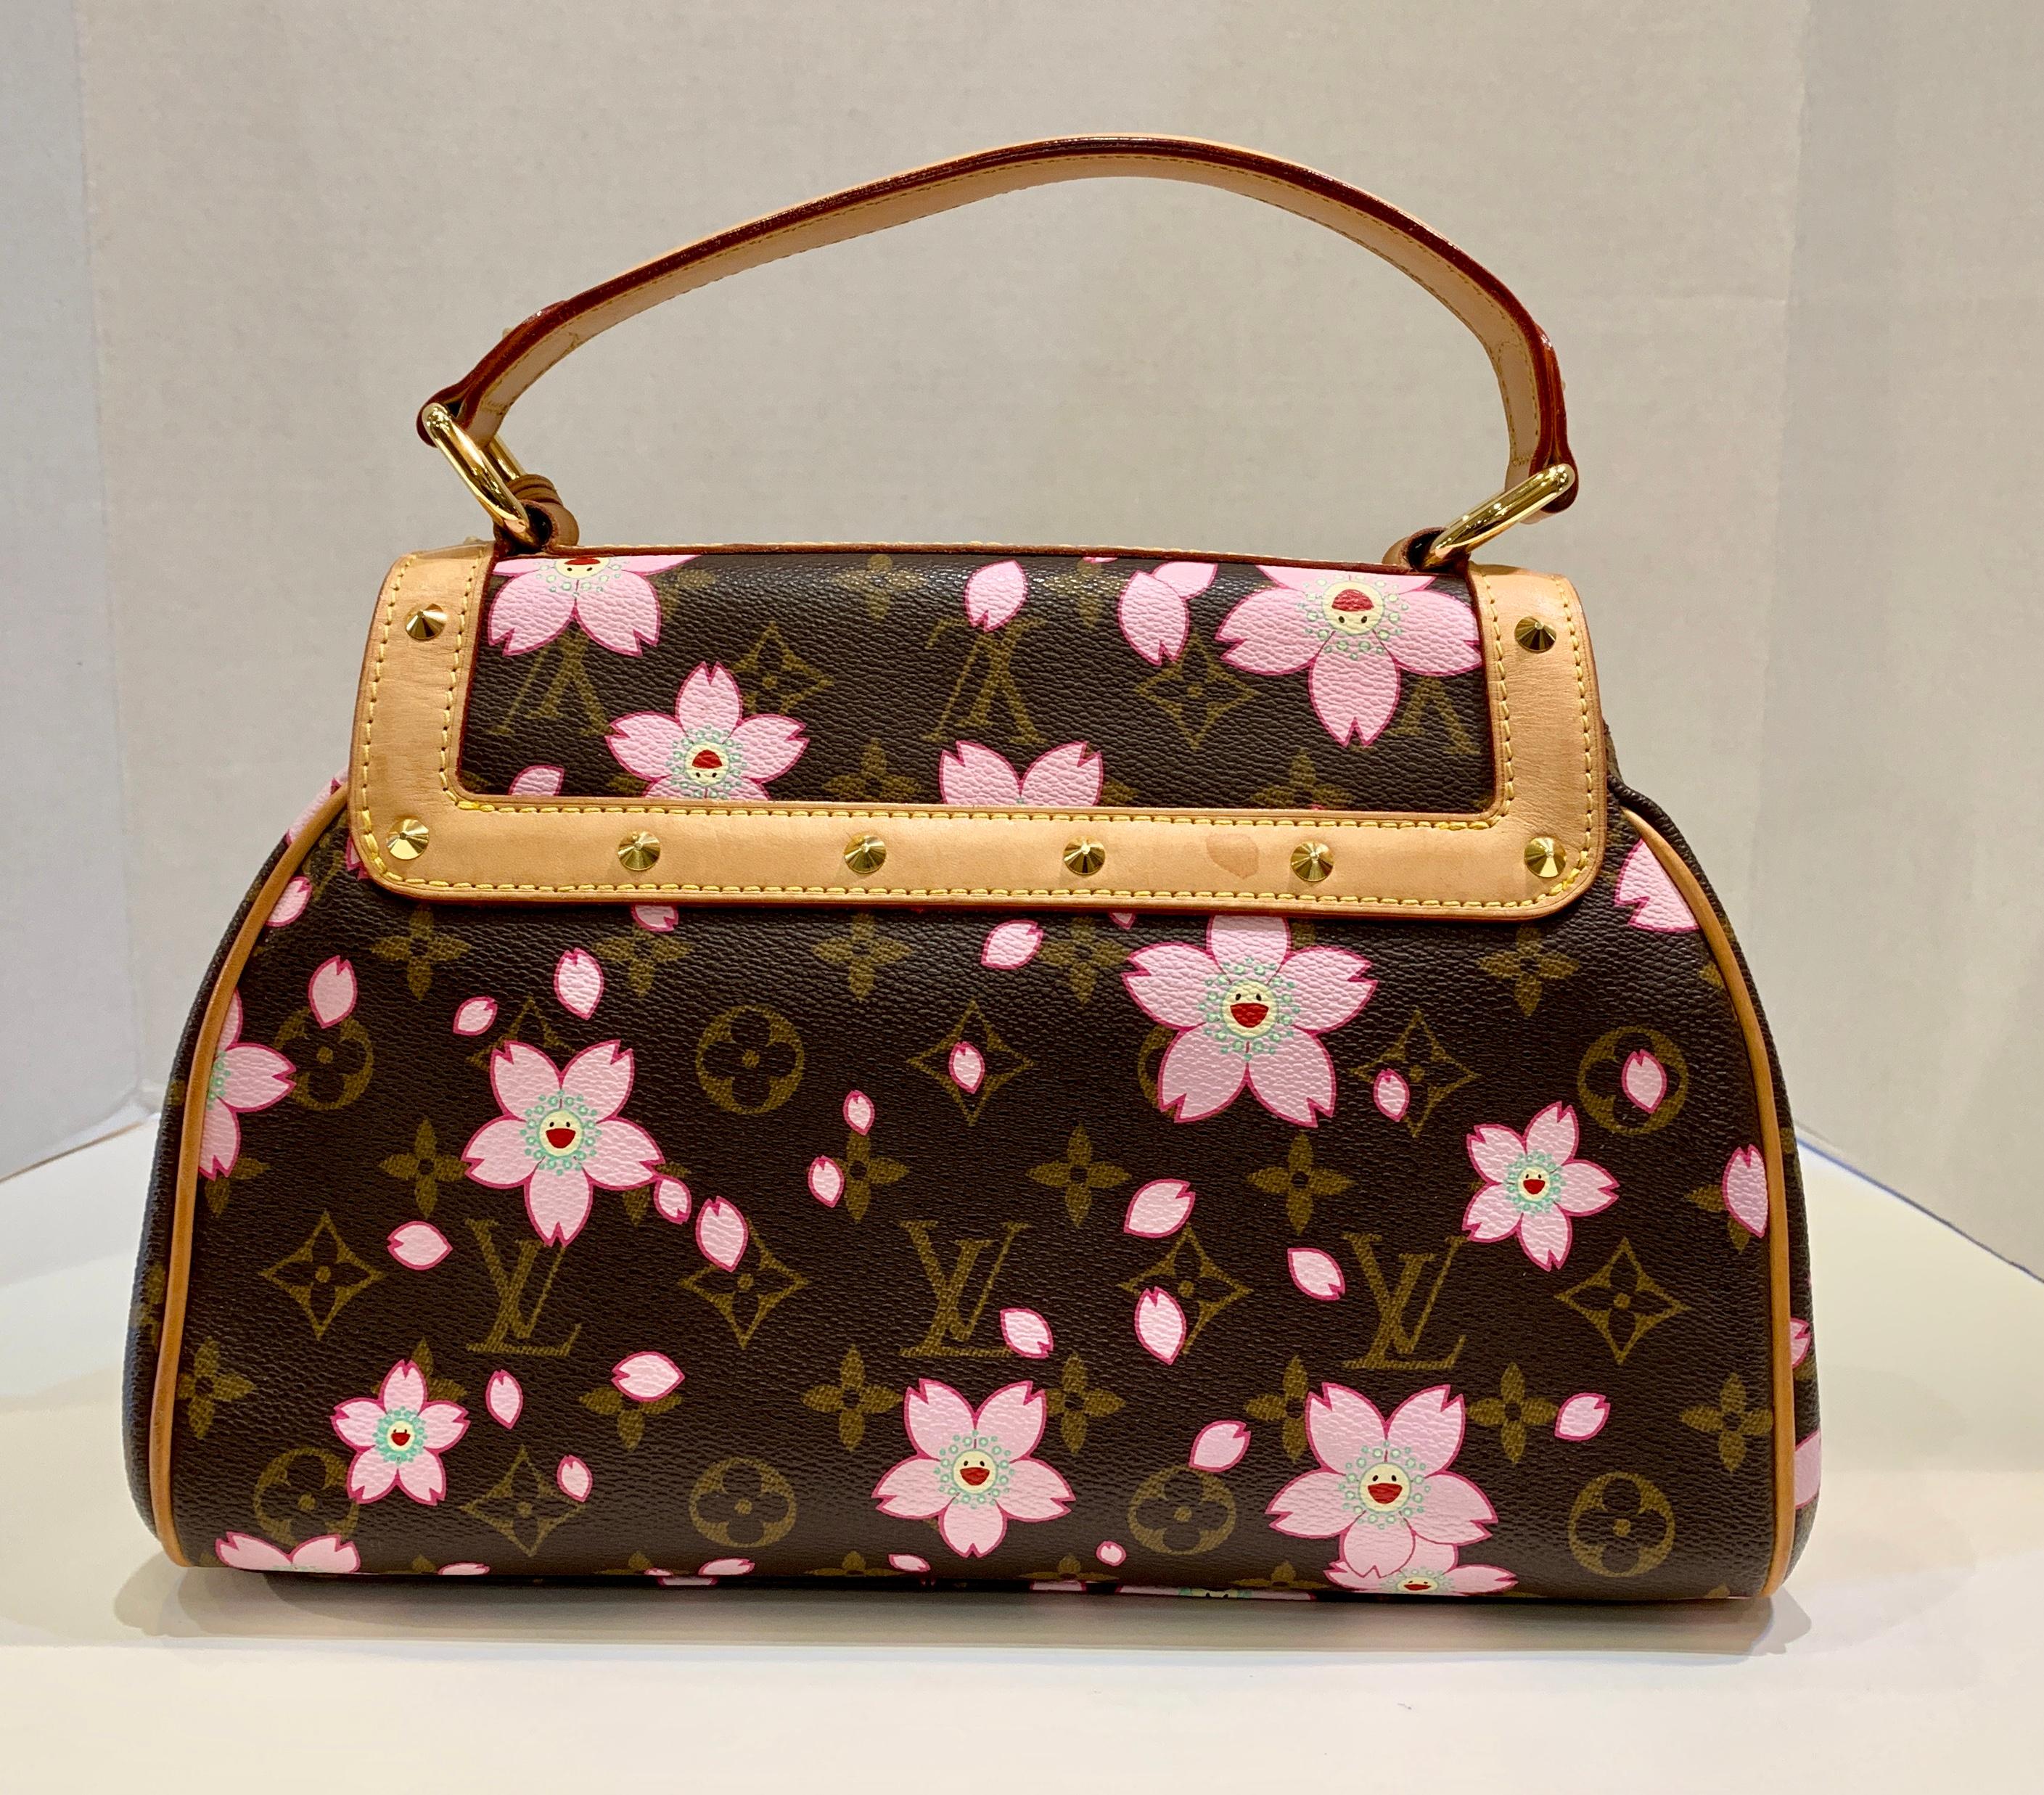 Rare collectible retro Louis Vuitton limited edition Cherry Blossom purse or satchel or handbag from the Spring/Summer 2003 Takashi Murakami Collection is a timeless and feminine bag that Louis Vuitton lovers everywhere want to collect.

Purse has